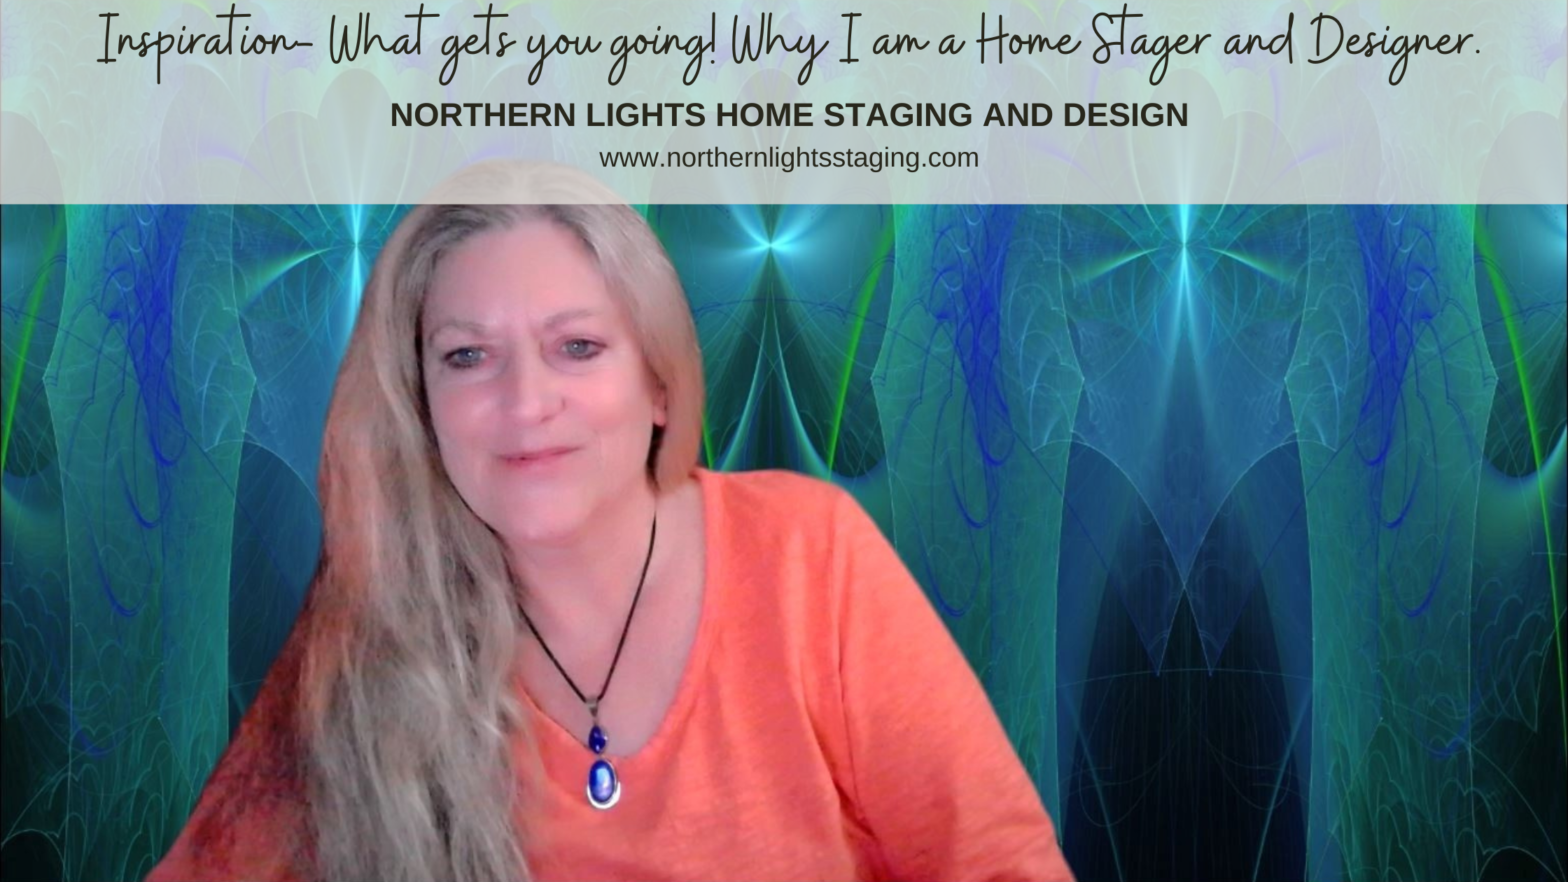 nspiration- What gets you going! Why I am a Home Stager and Designer.